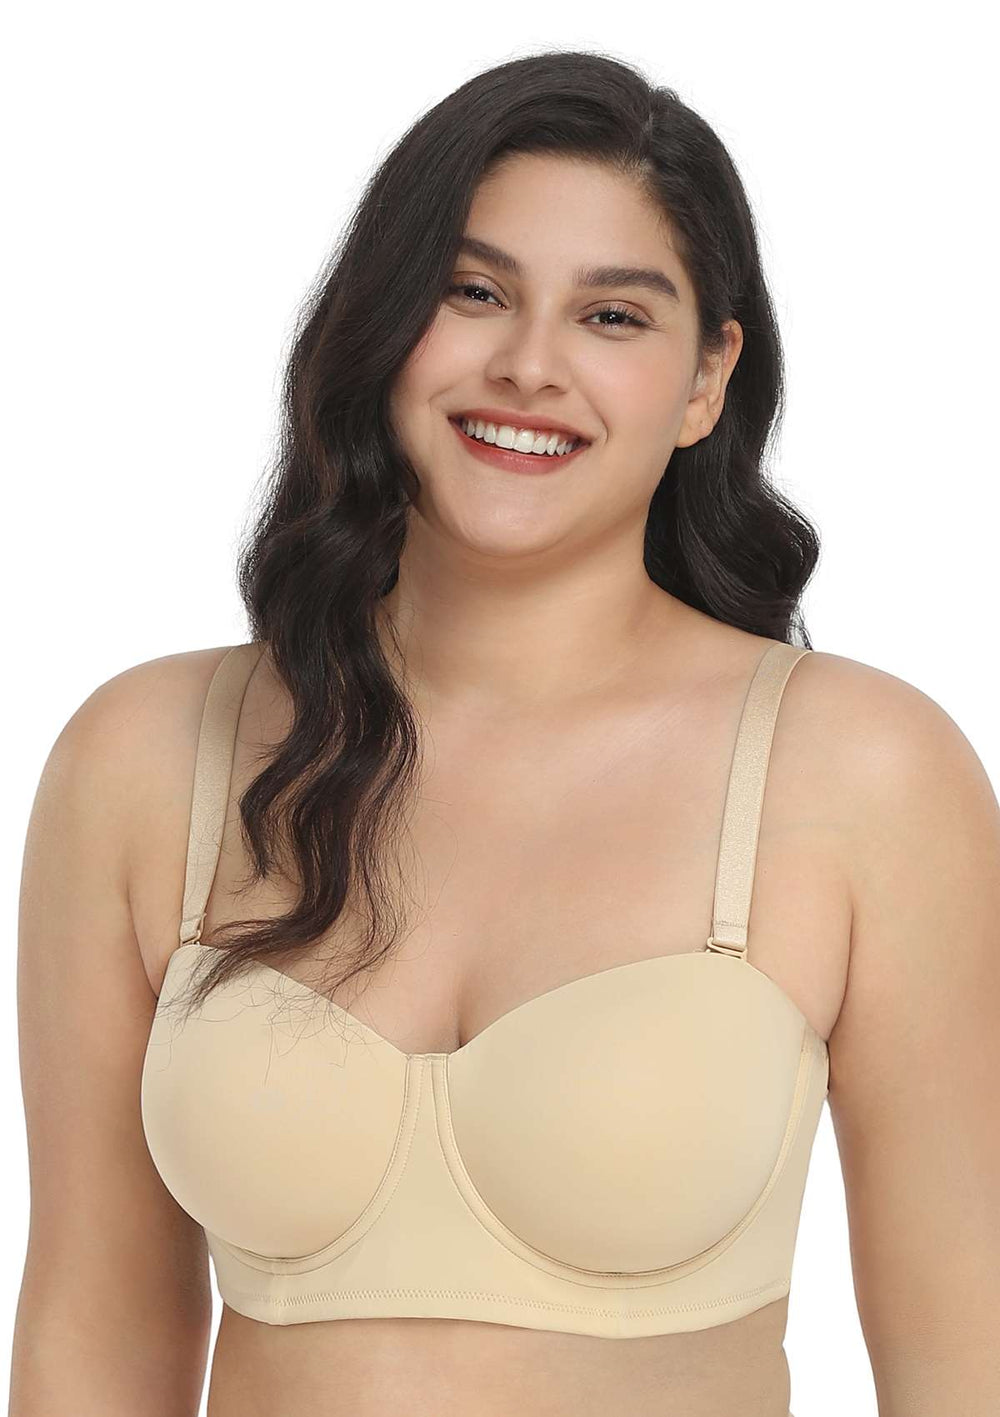 Stick On Bra Australia Sizes A to G. Padded, plunge, multiway and